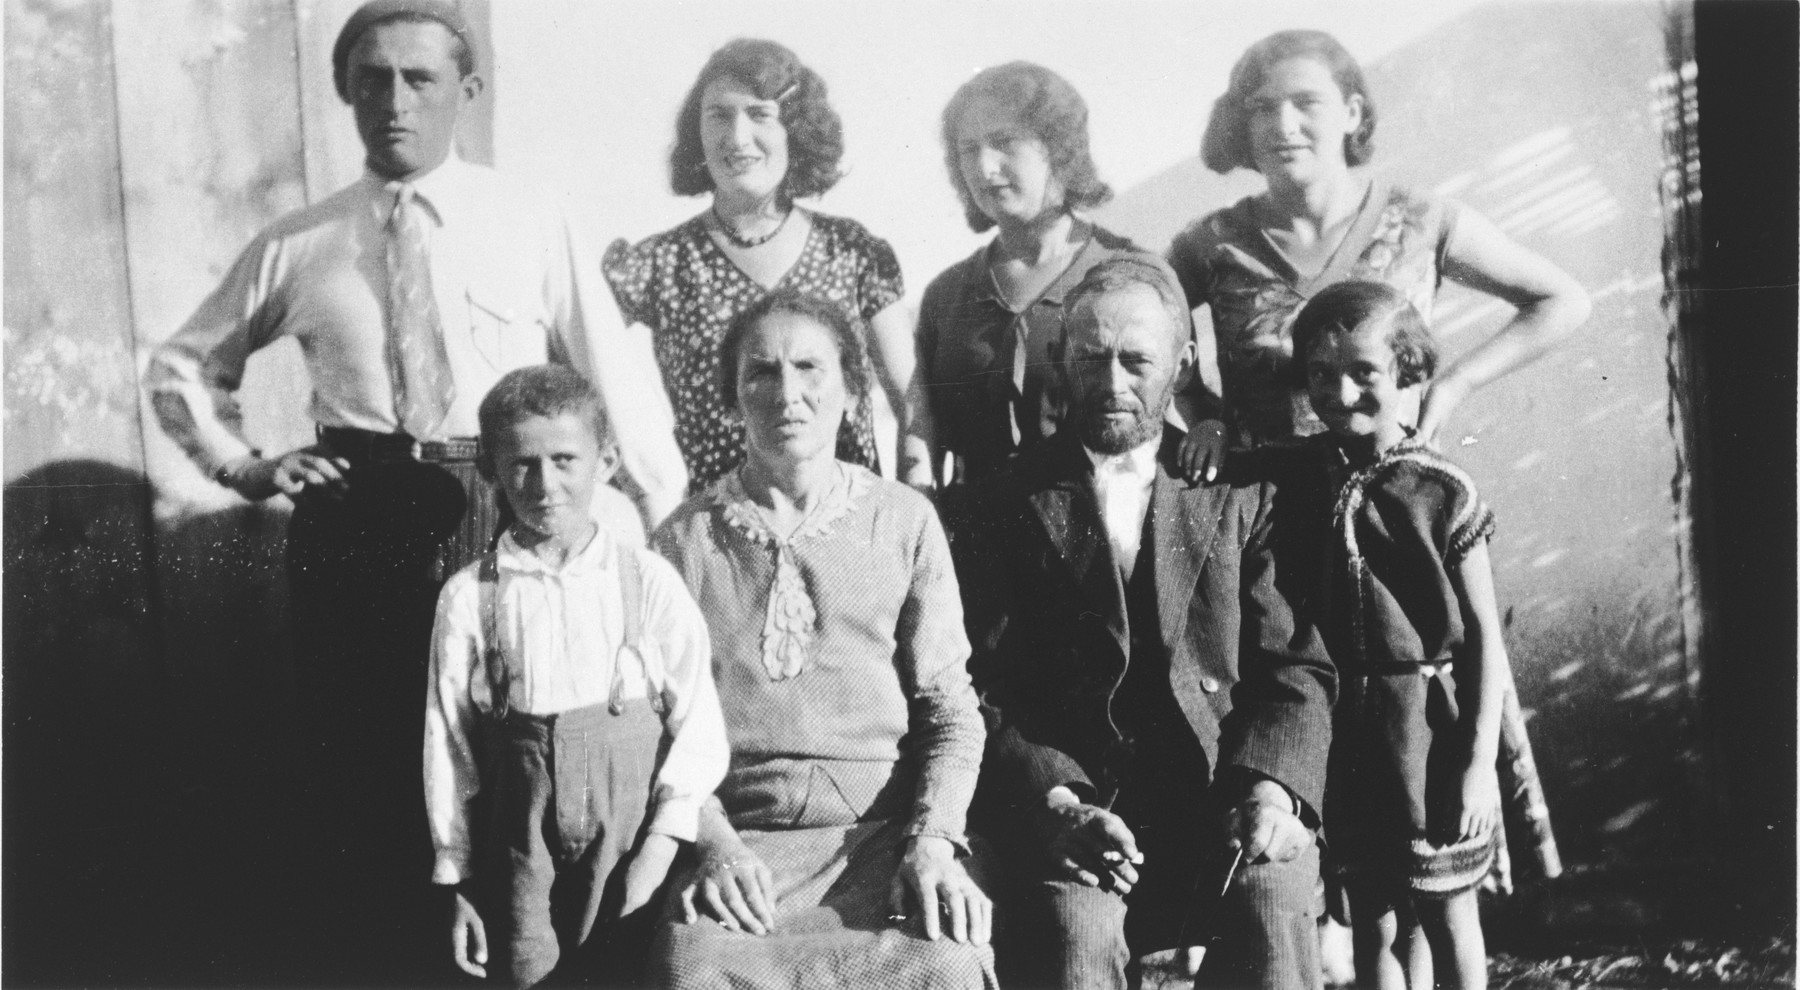 Rivka and Meshilem Frisch pose with their children outside their home in a small shtetl.

Standing from left to right are Yisroel, Fridjeh, Ruzie and Peshe.  Sitting are Dudie, Rivka, Meshilem and Mancha.  Only Fridjeh survived.